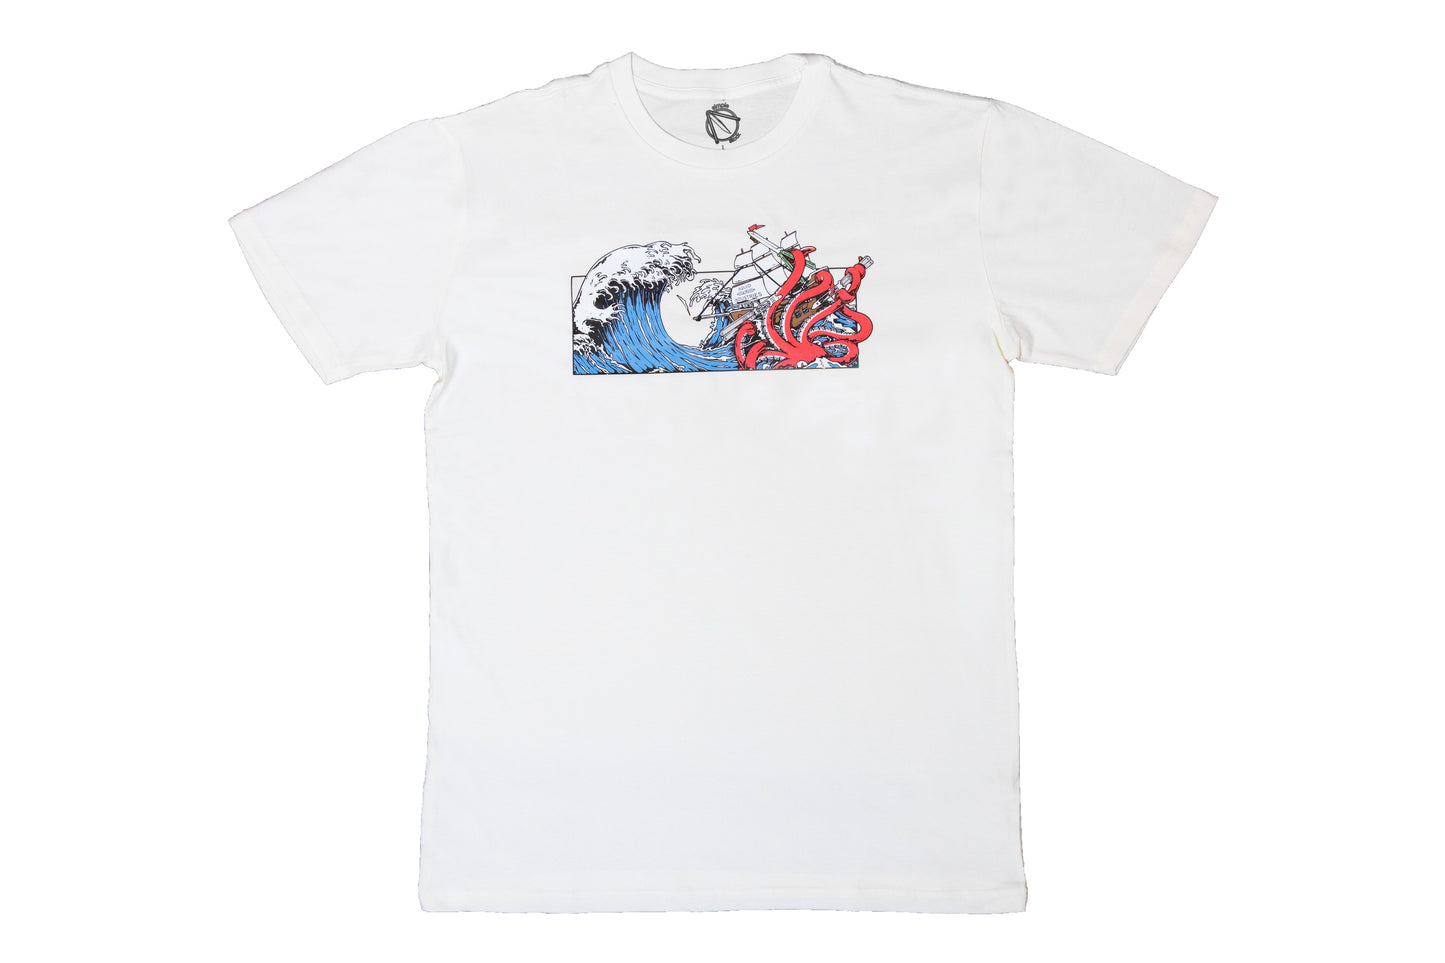 Squid Industries x Simple Stock Collaboration Off-White T-shirt featuring a Kraken in Tsunami waves holding on the Squid Industries balisongs